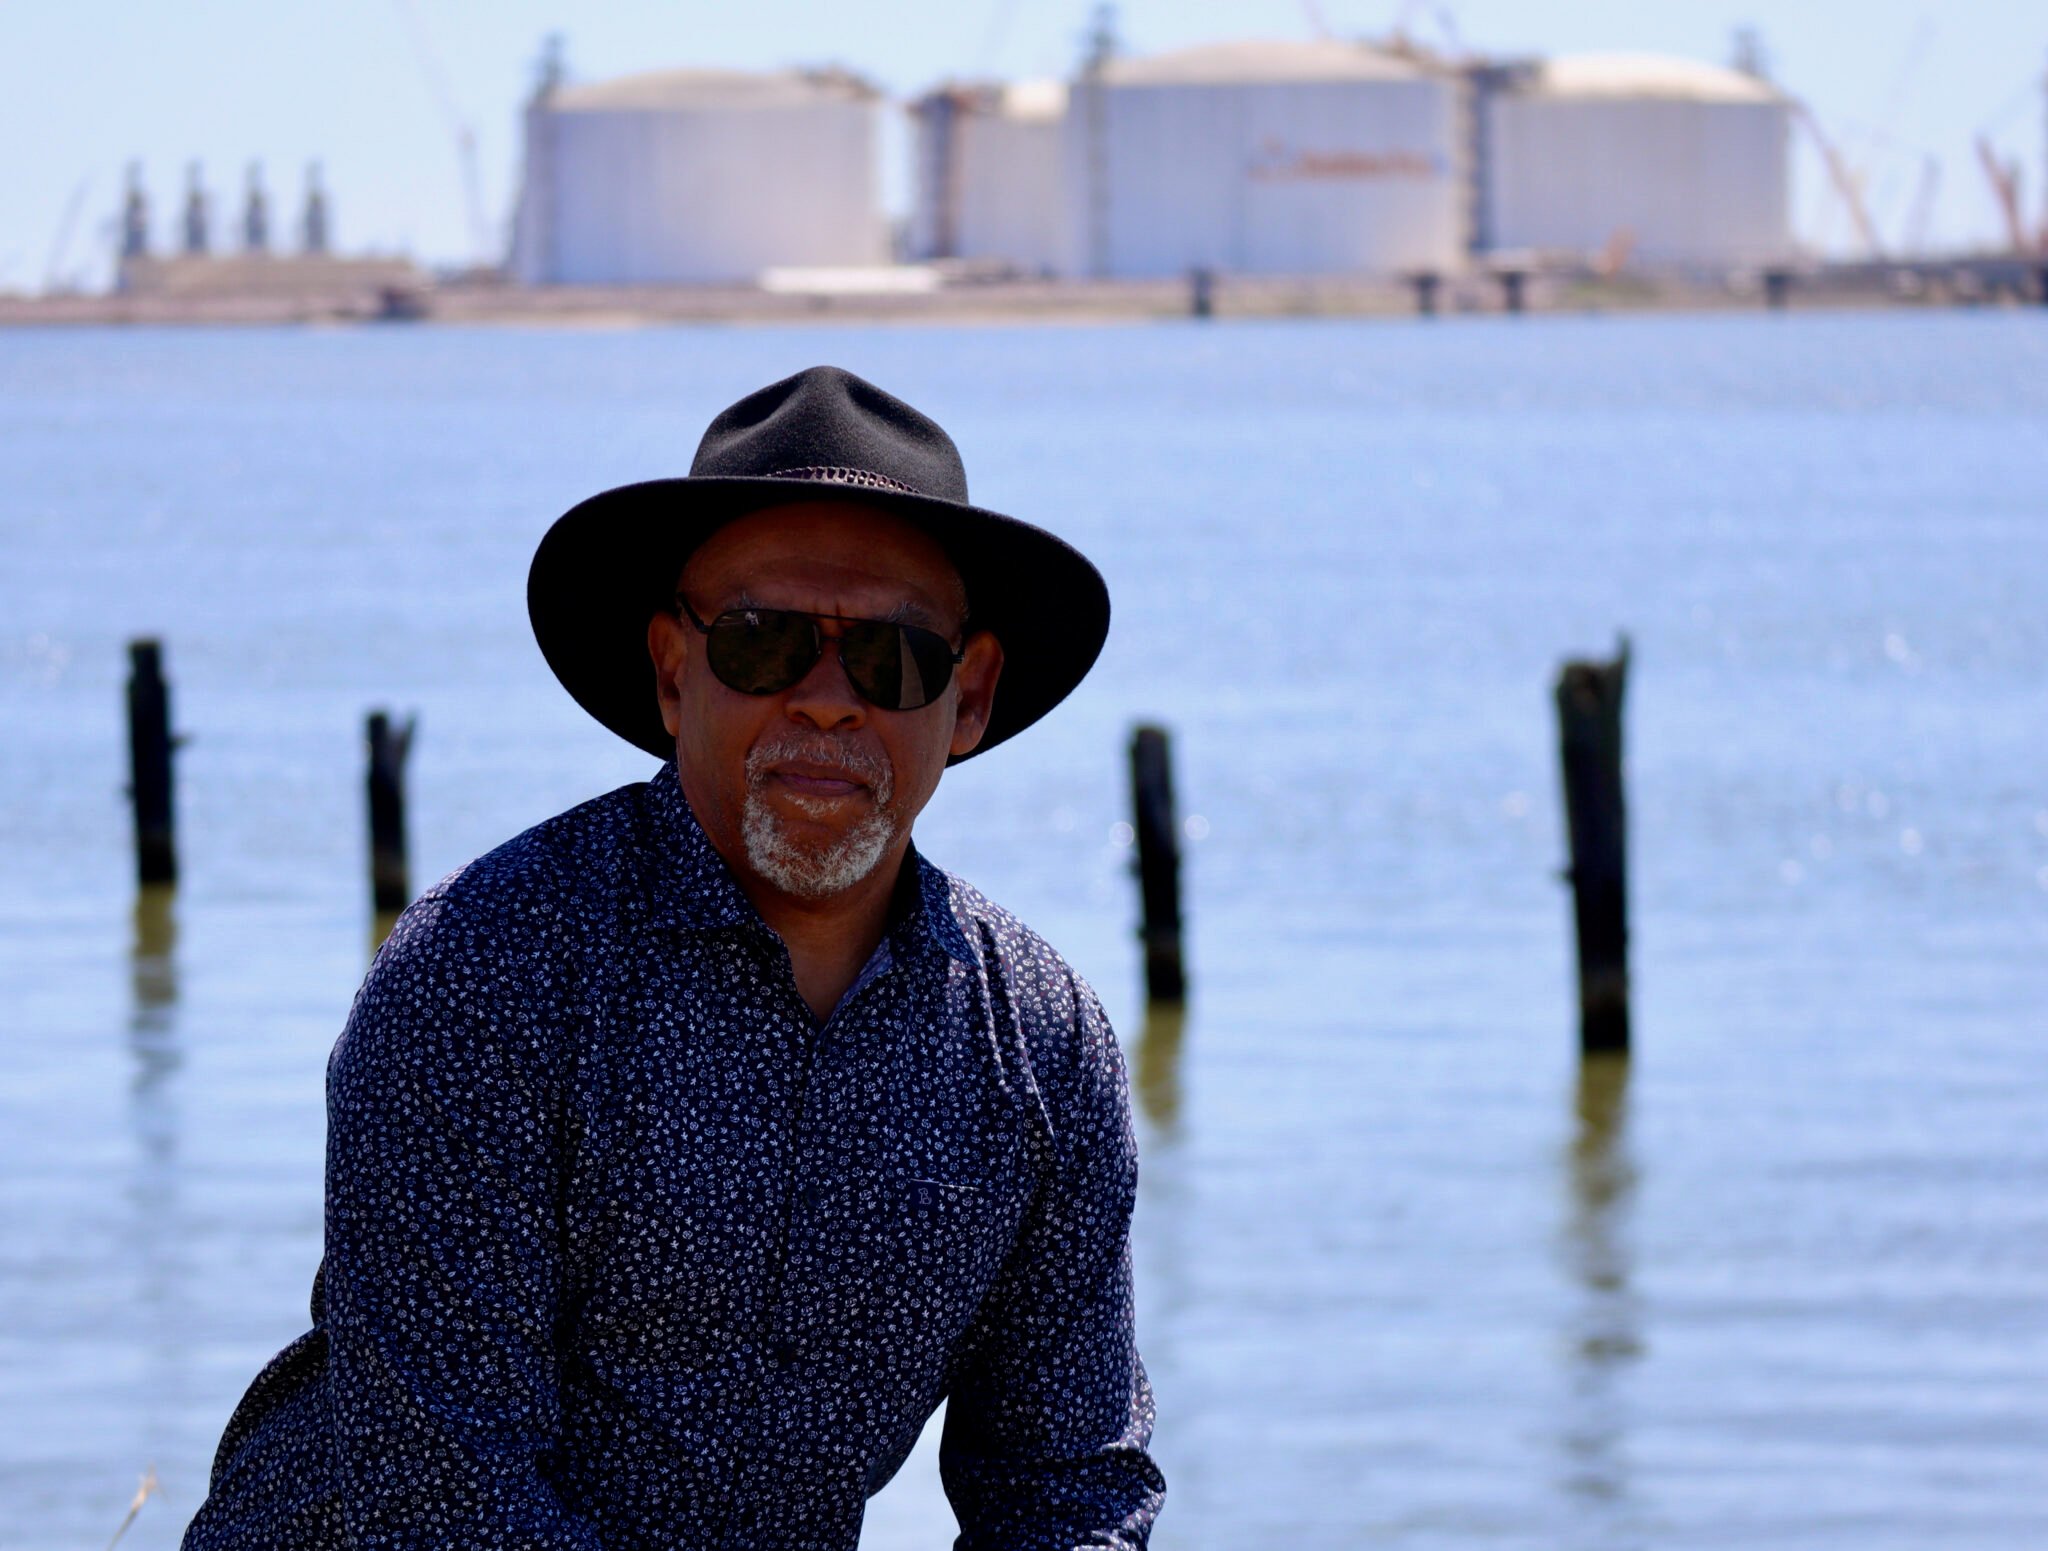 A Black man in a black panama hat and dark blue dot-patterned shirt poses by the water with an LNG terminal behind him.